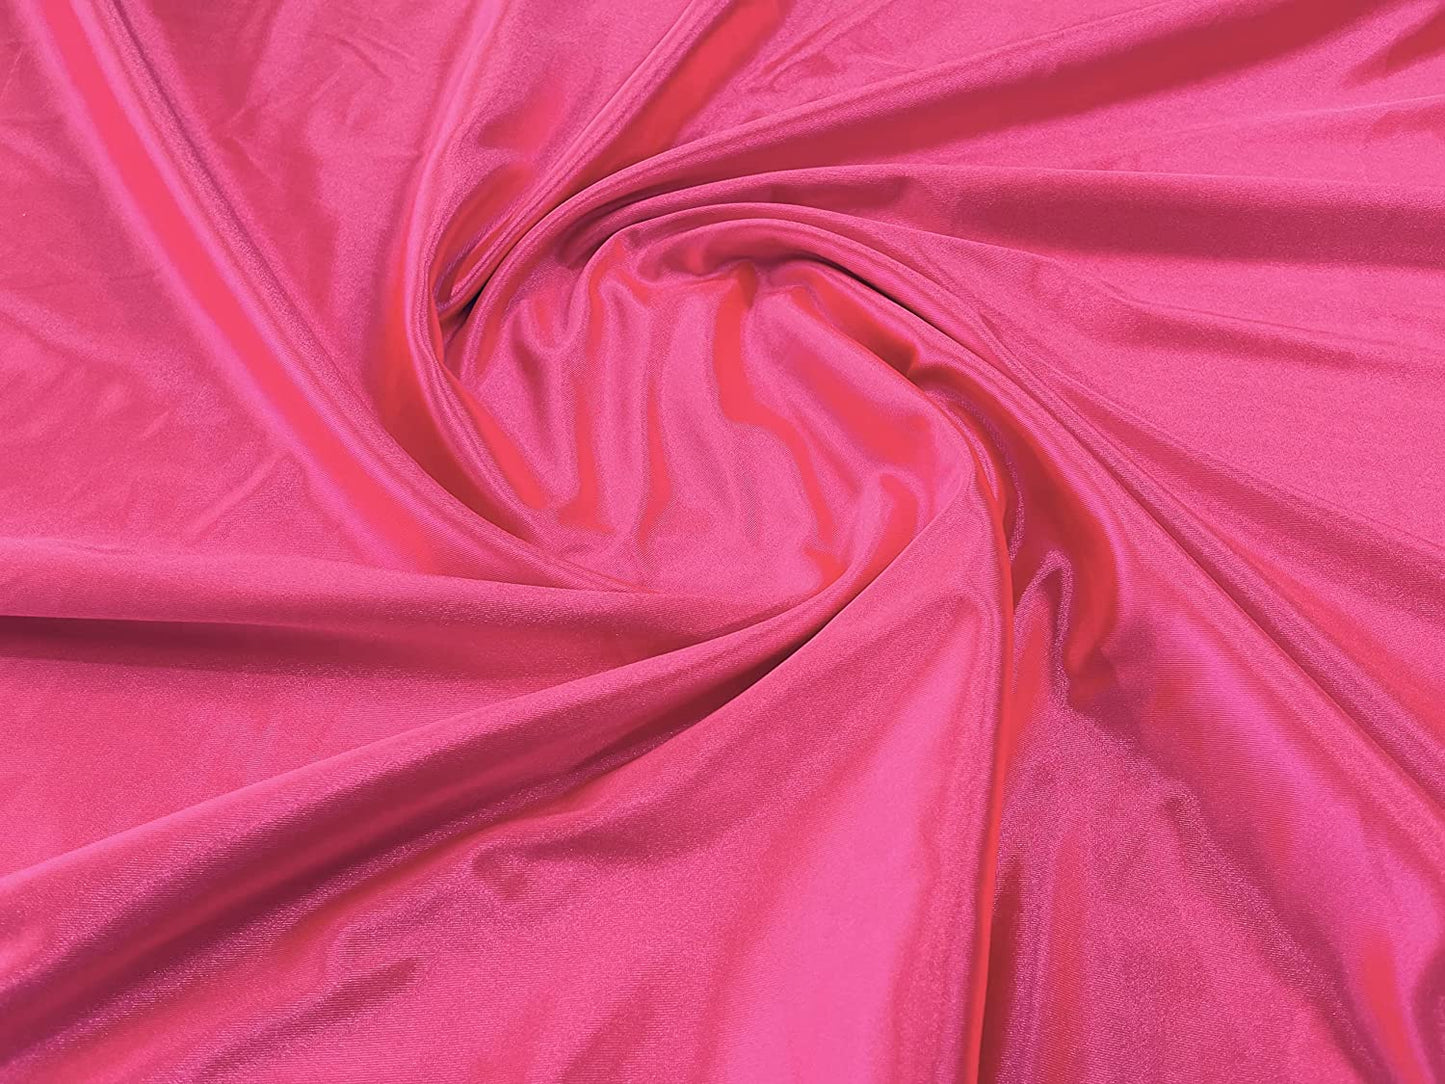 Deluxe Shiny Polyester Spandex Stretch Fabric (1 Yard, Neon Hot Pink)